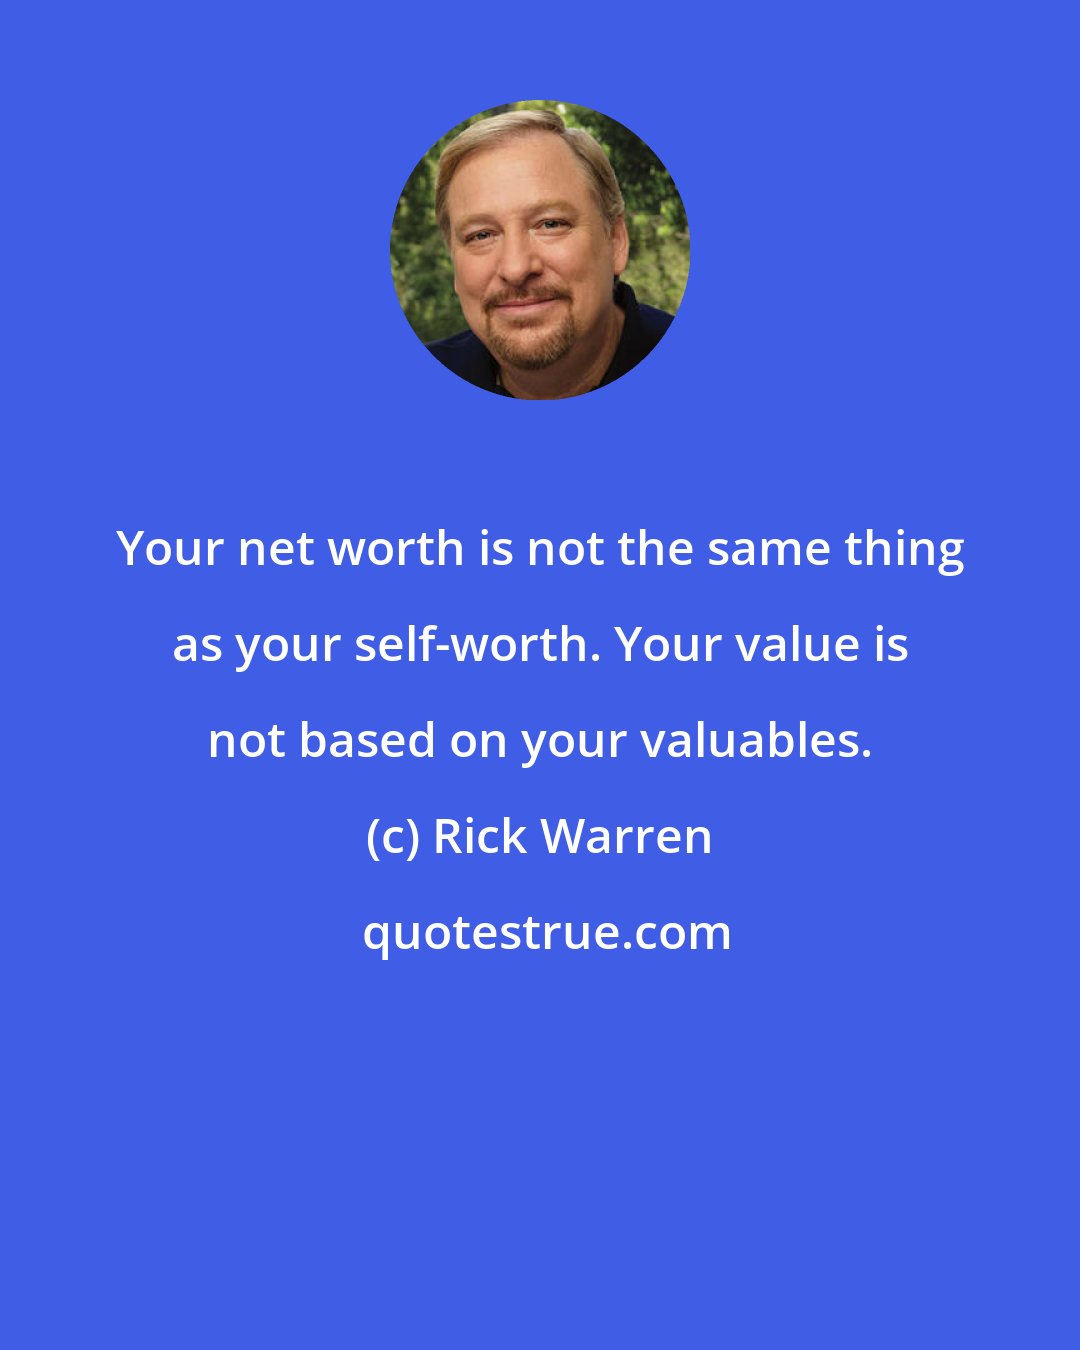 Rick Warren: Your net worth is not the same thing as your self-worth. Your value is not based on your valuables.